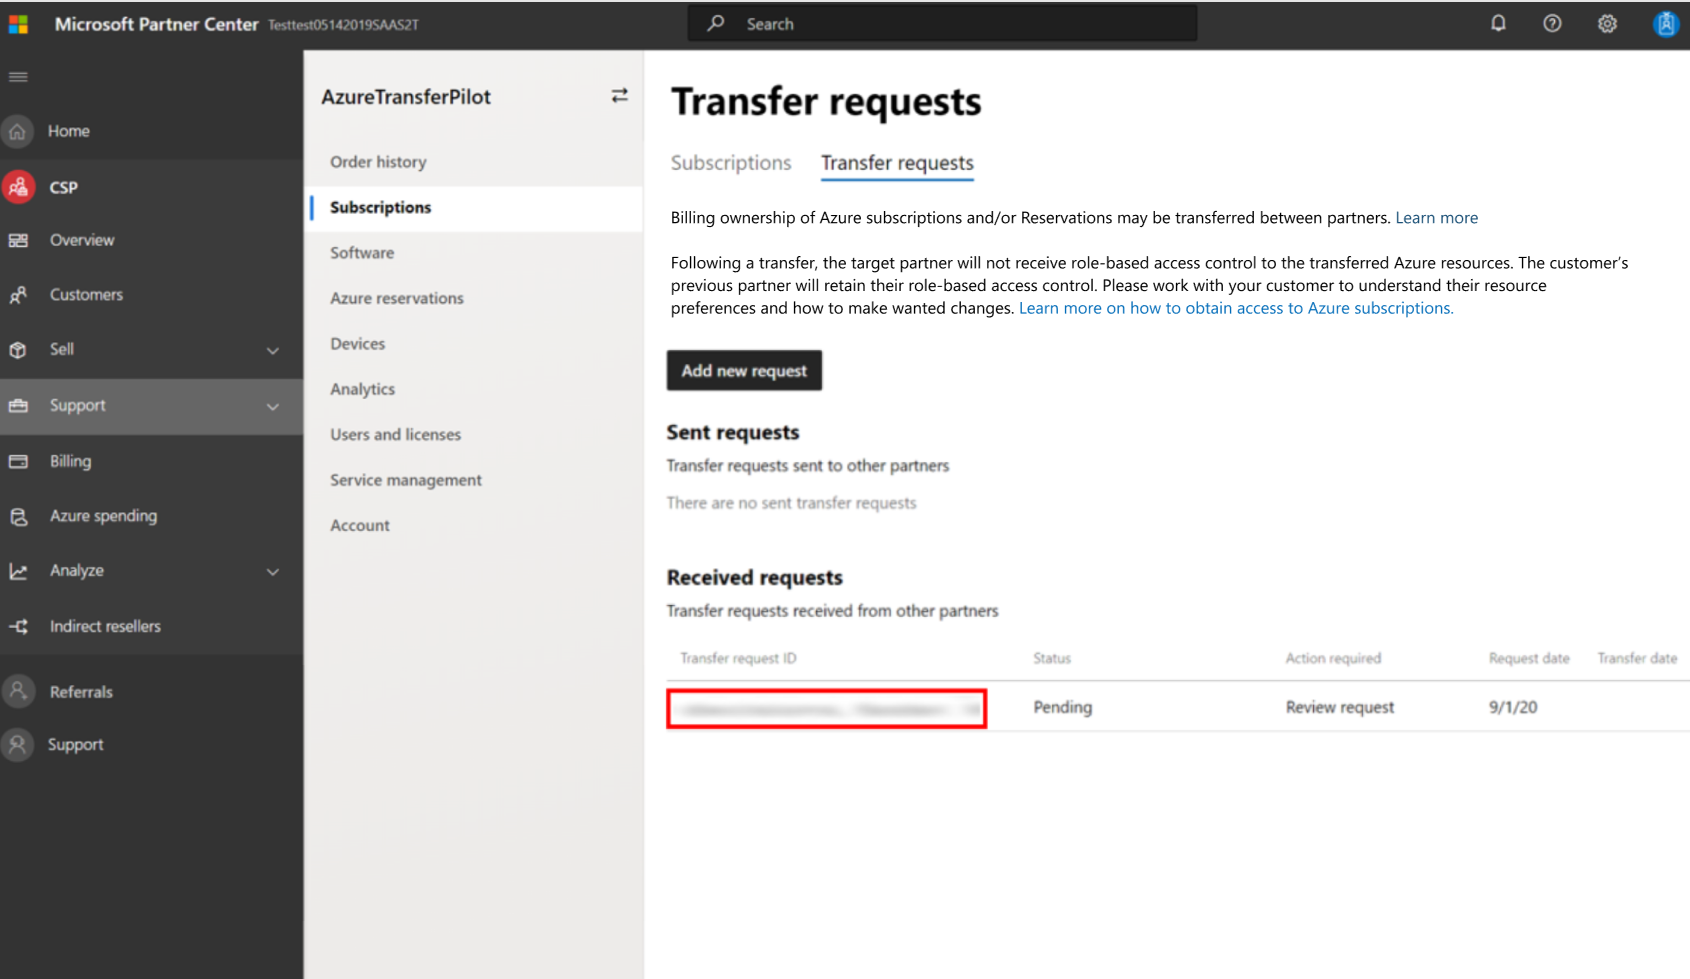 Screenshot that shows the Transfer requests tab, as seen by the current partner.